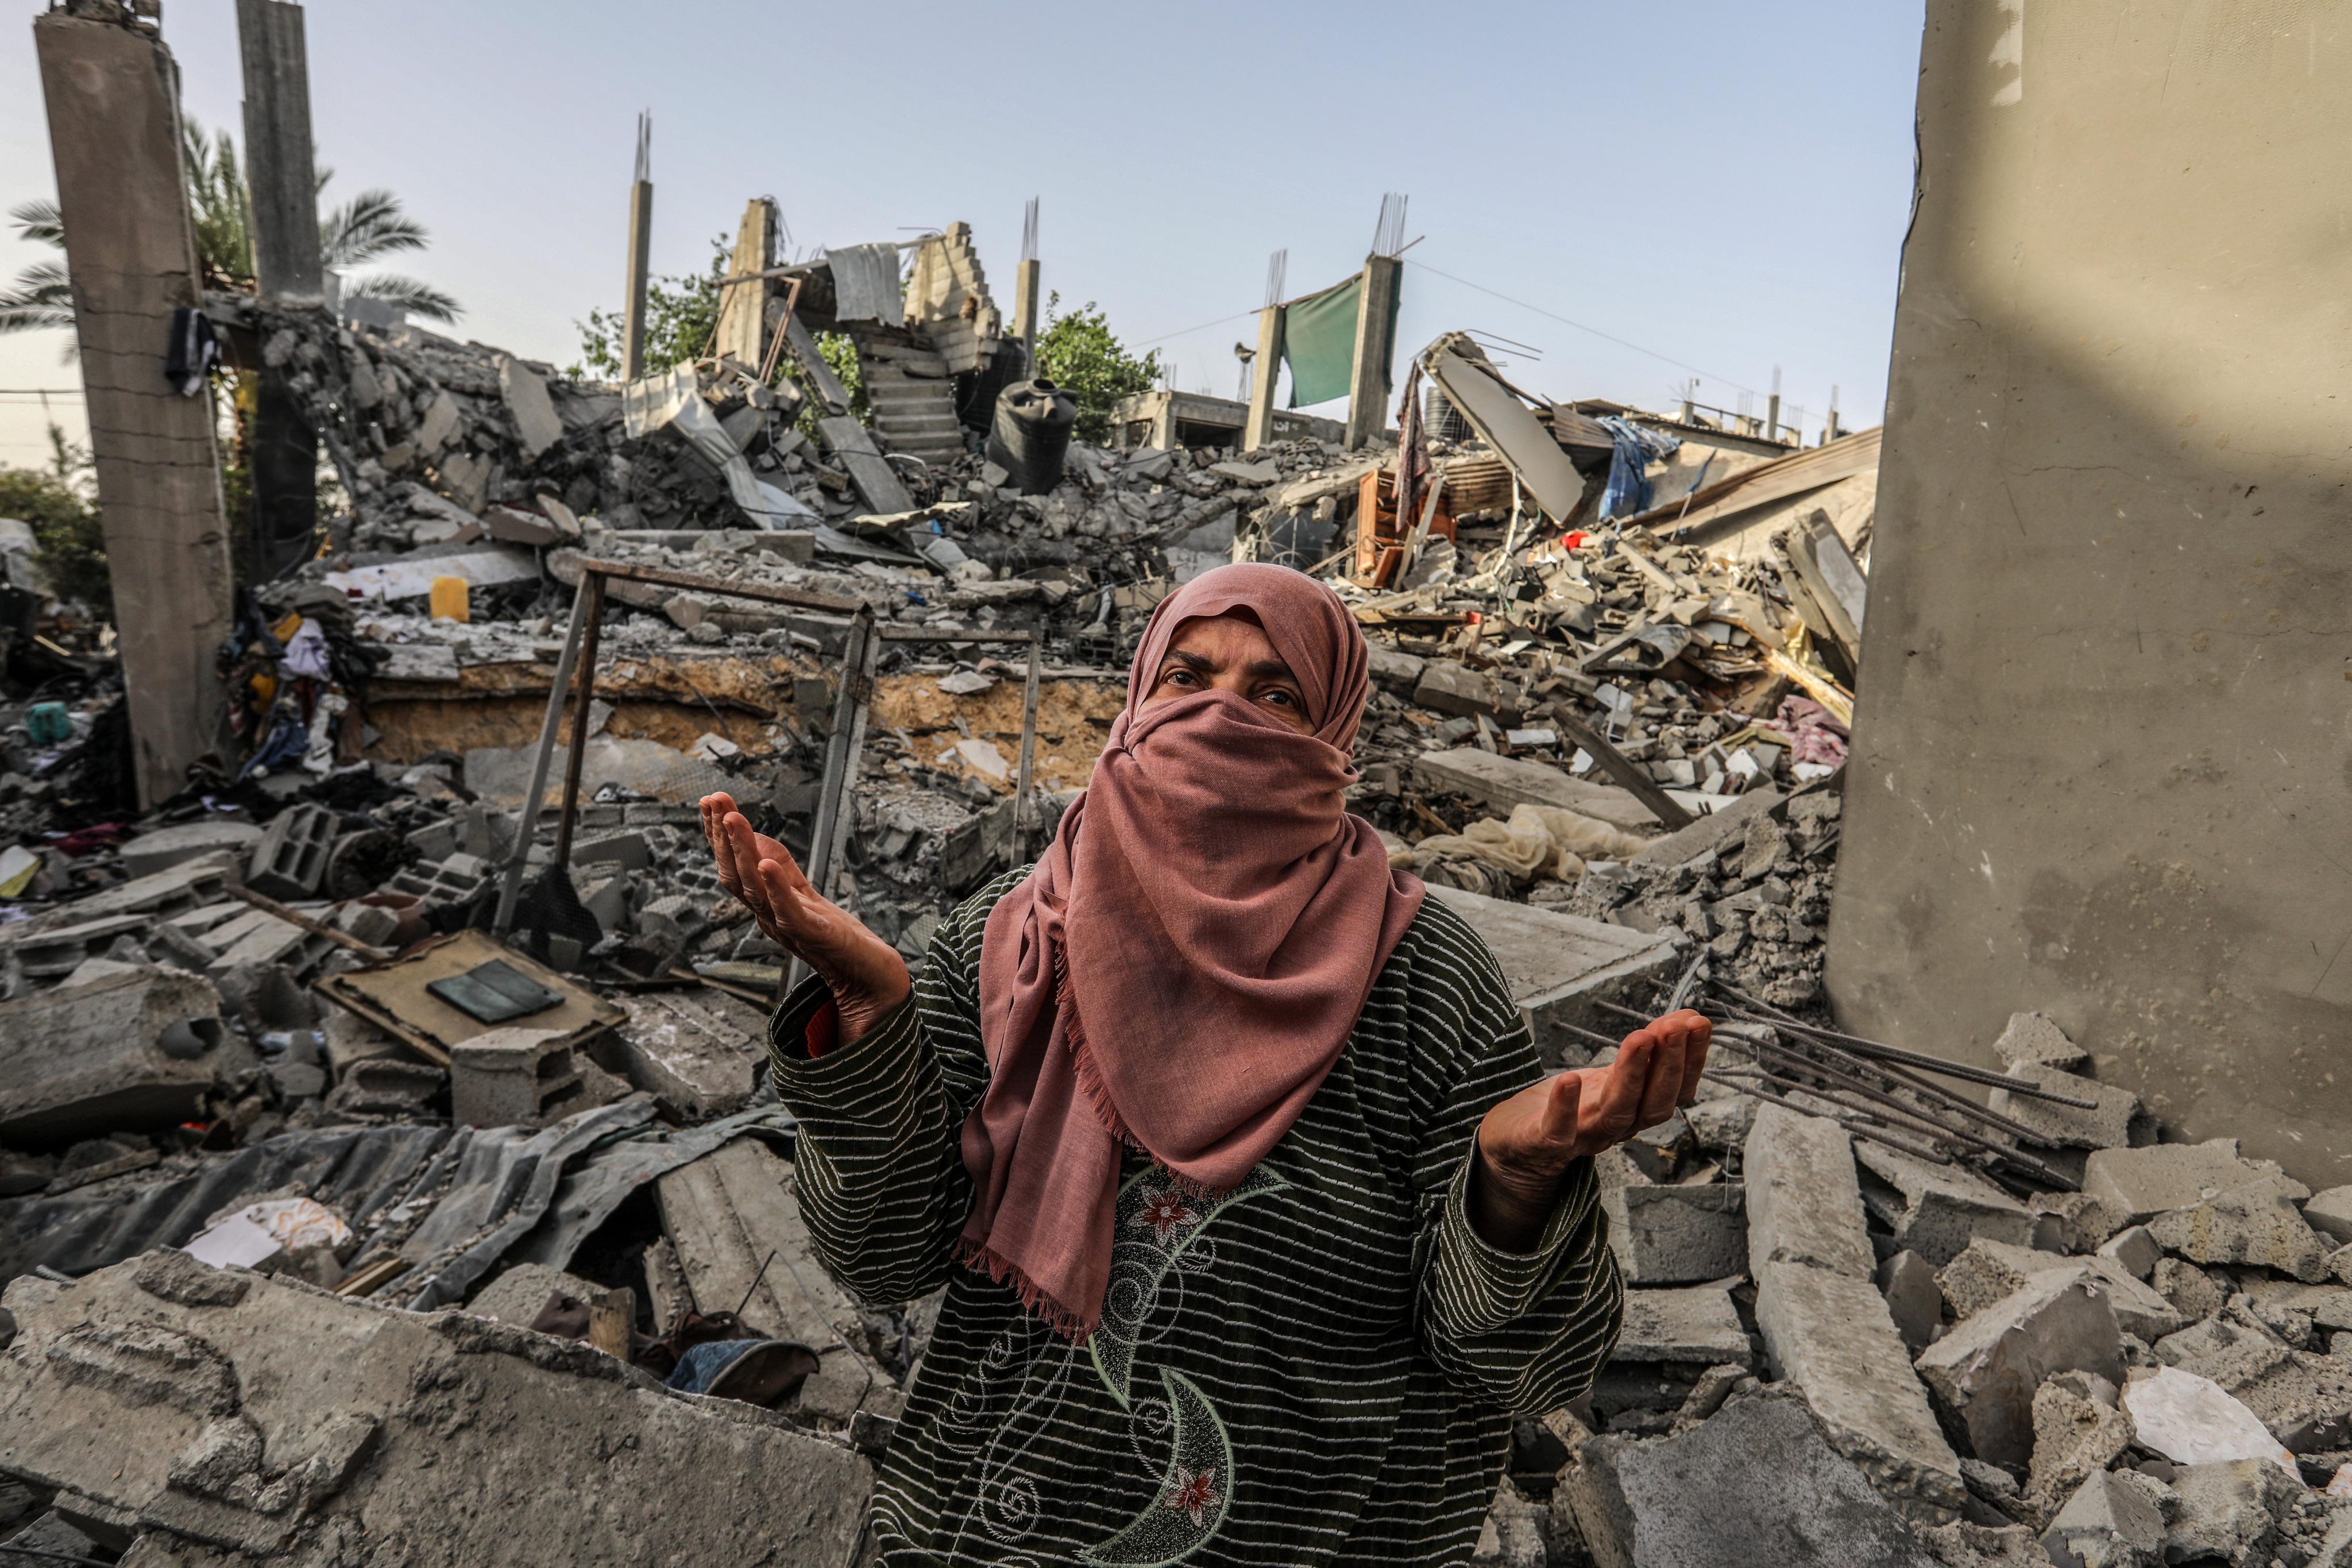 A Palestinian woman inspects a house that was destroyed in Israeli bombing, in the southern Gaza Strip last week. Photo: dpa 